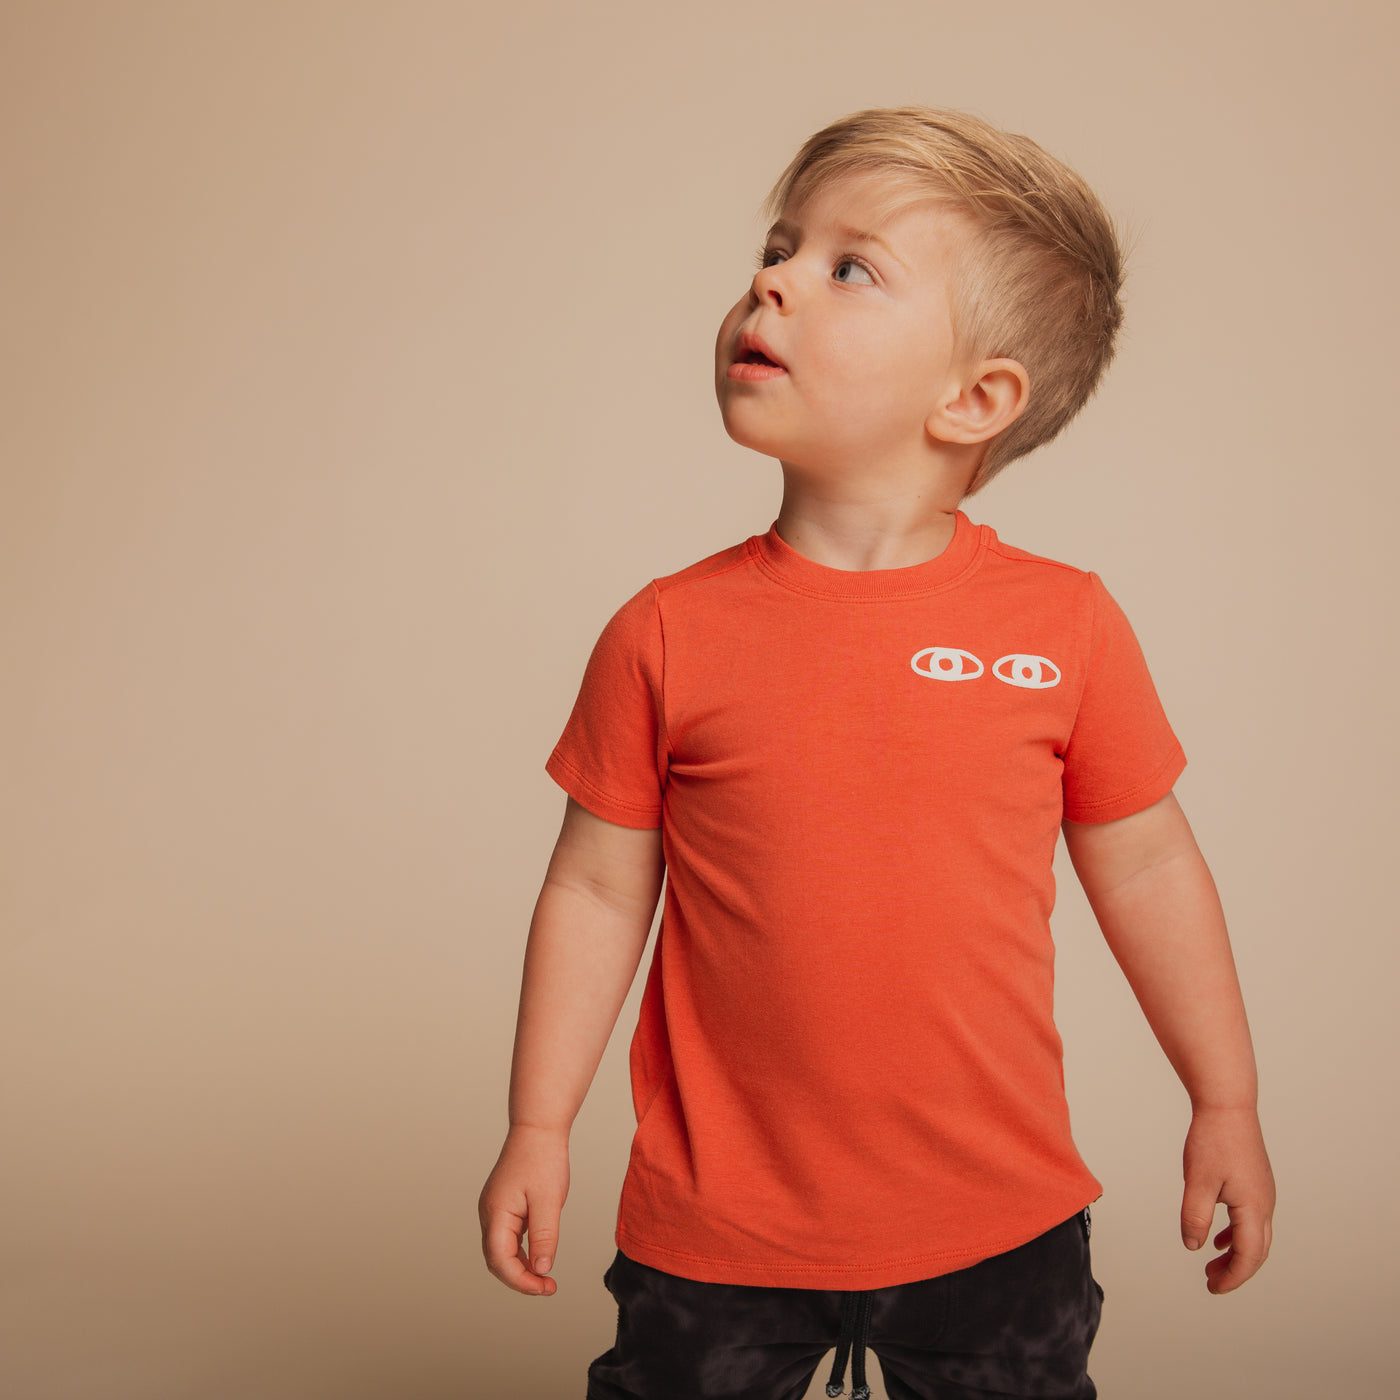 Short Sleeve Rounded Kids Tee - 'Keep Your Cool'